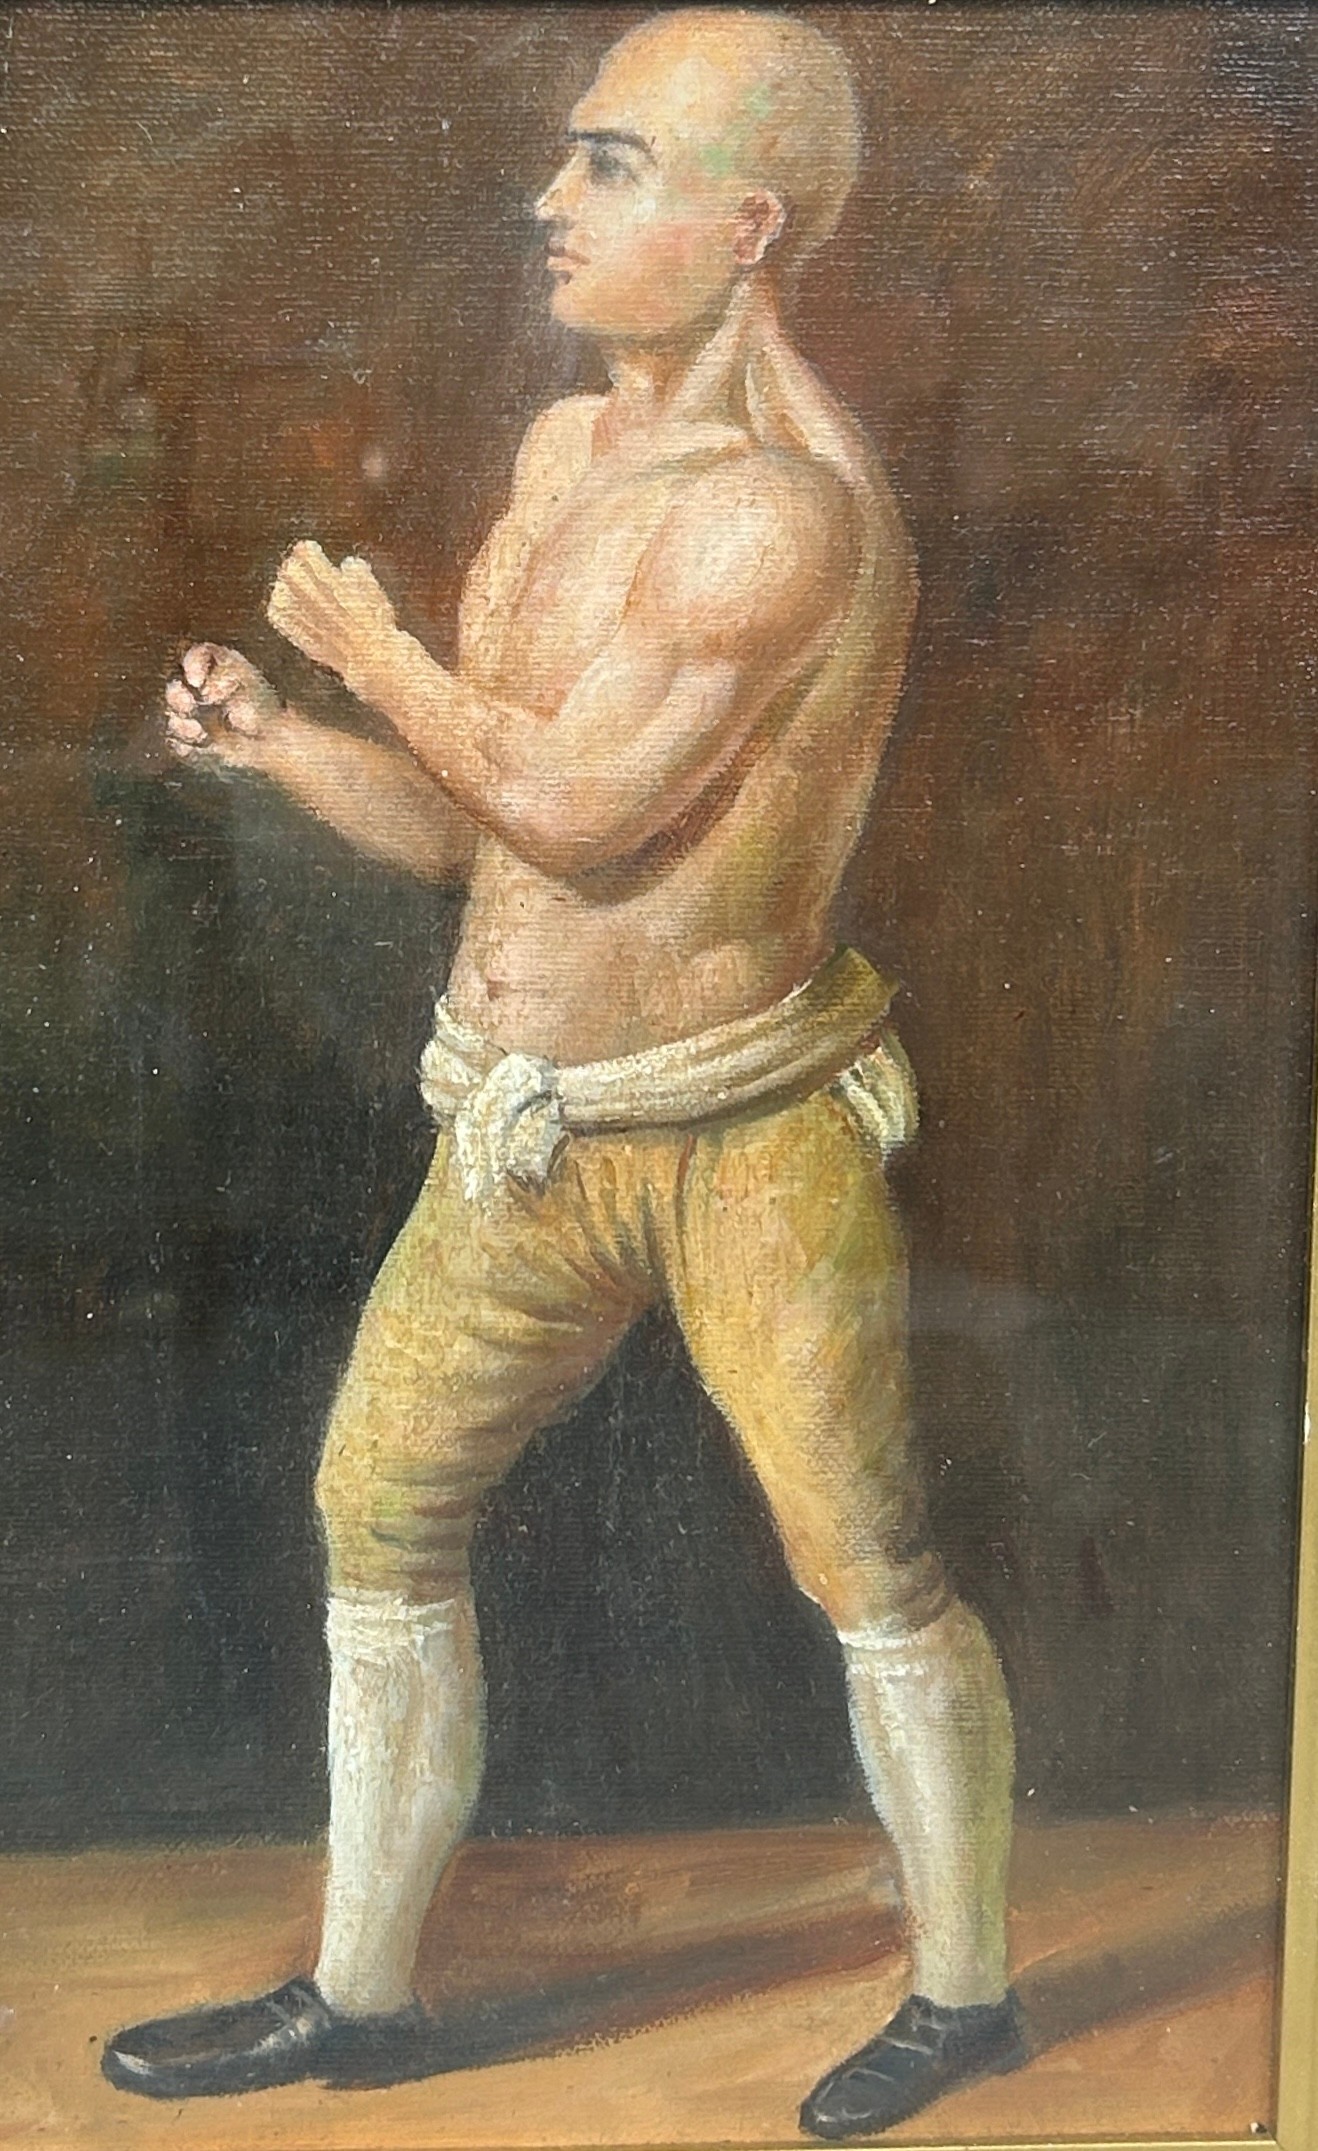 A 19TH CENTURY OIL ON CANVAS PAINTING DEPICTING THE FAMOUS PUGILIST GEORGE 'COACHMAN' STEVENSON, - Image 2 of 5